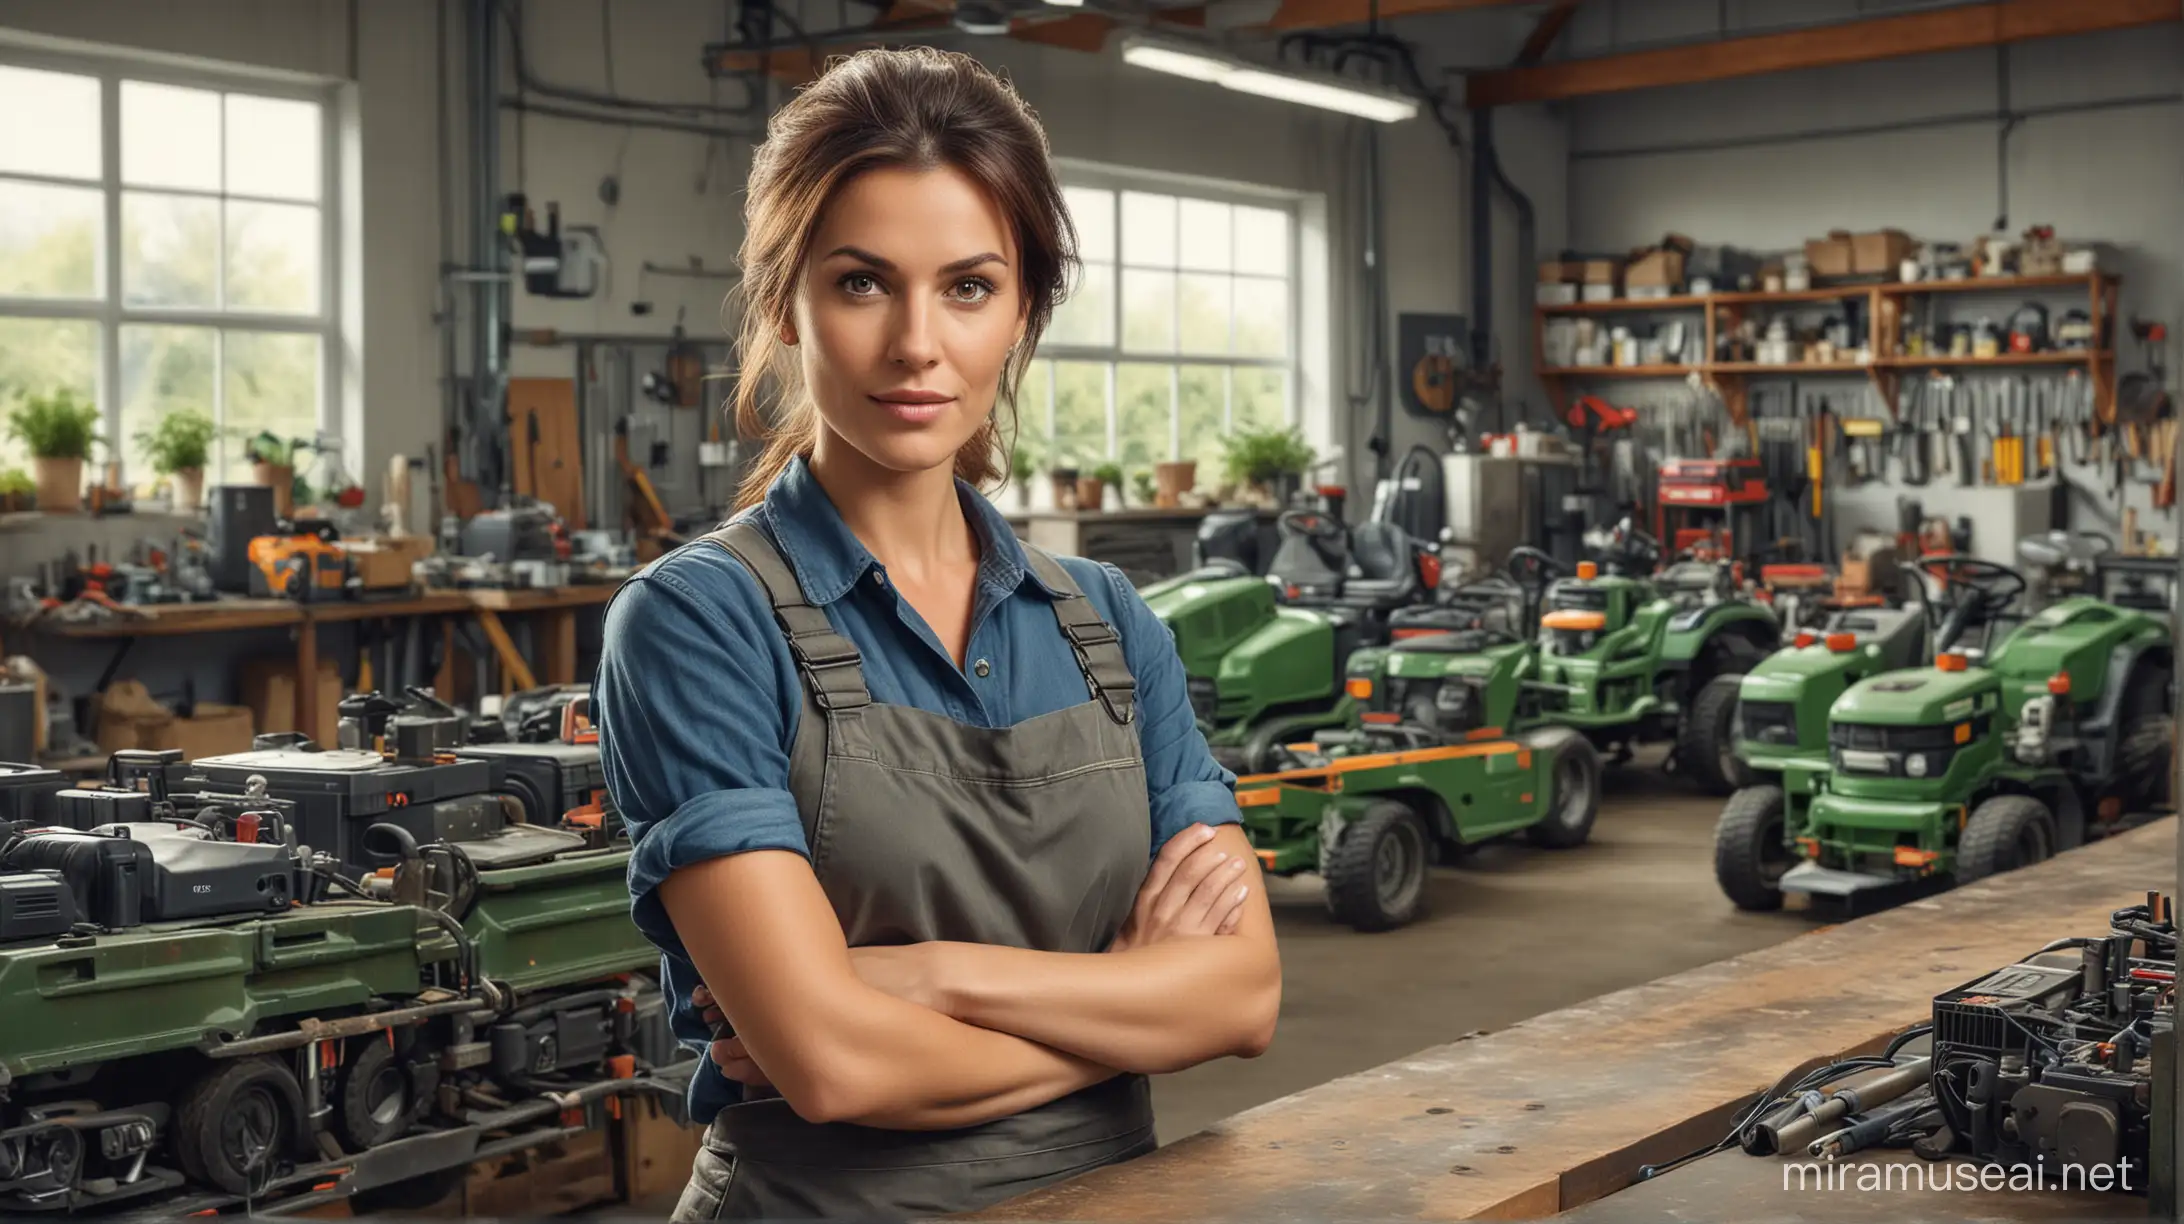 Professional Woman in Organized Industrial Workshop with Lawn Mowers